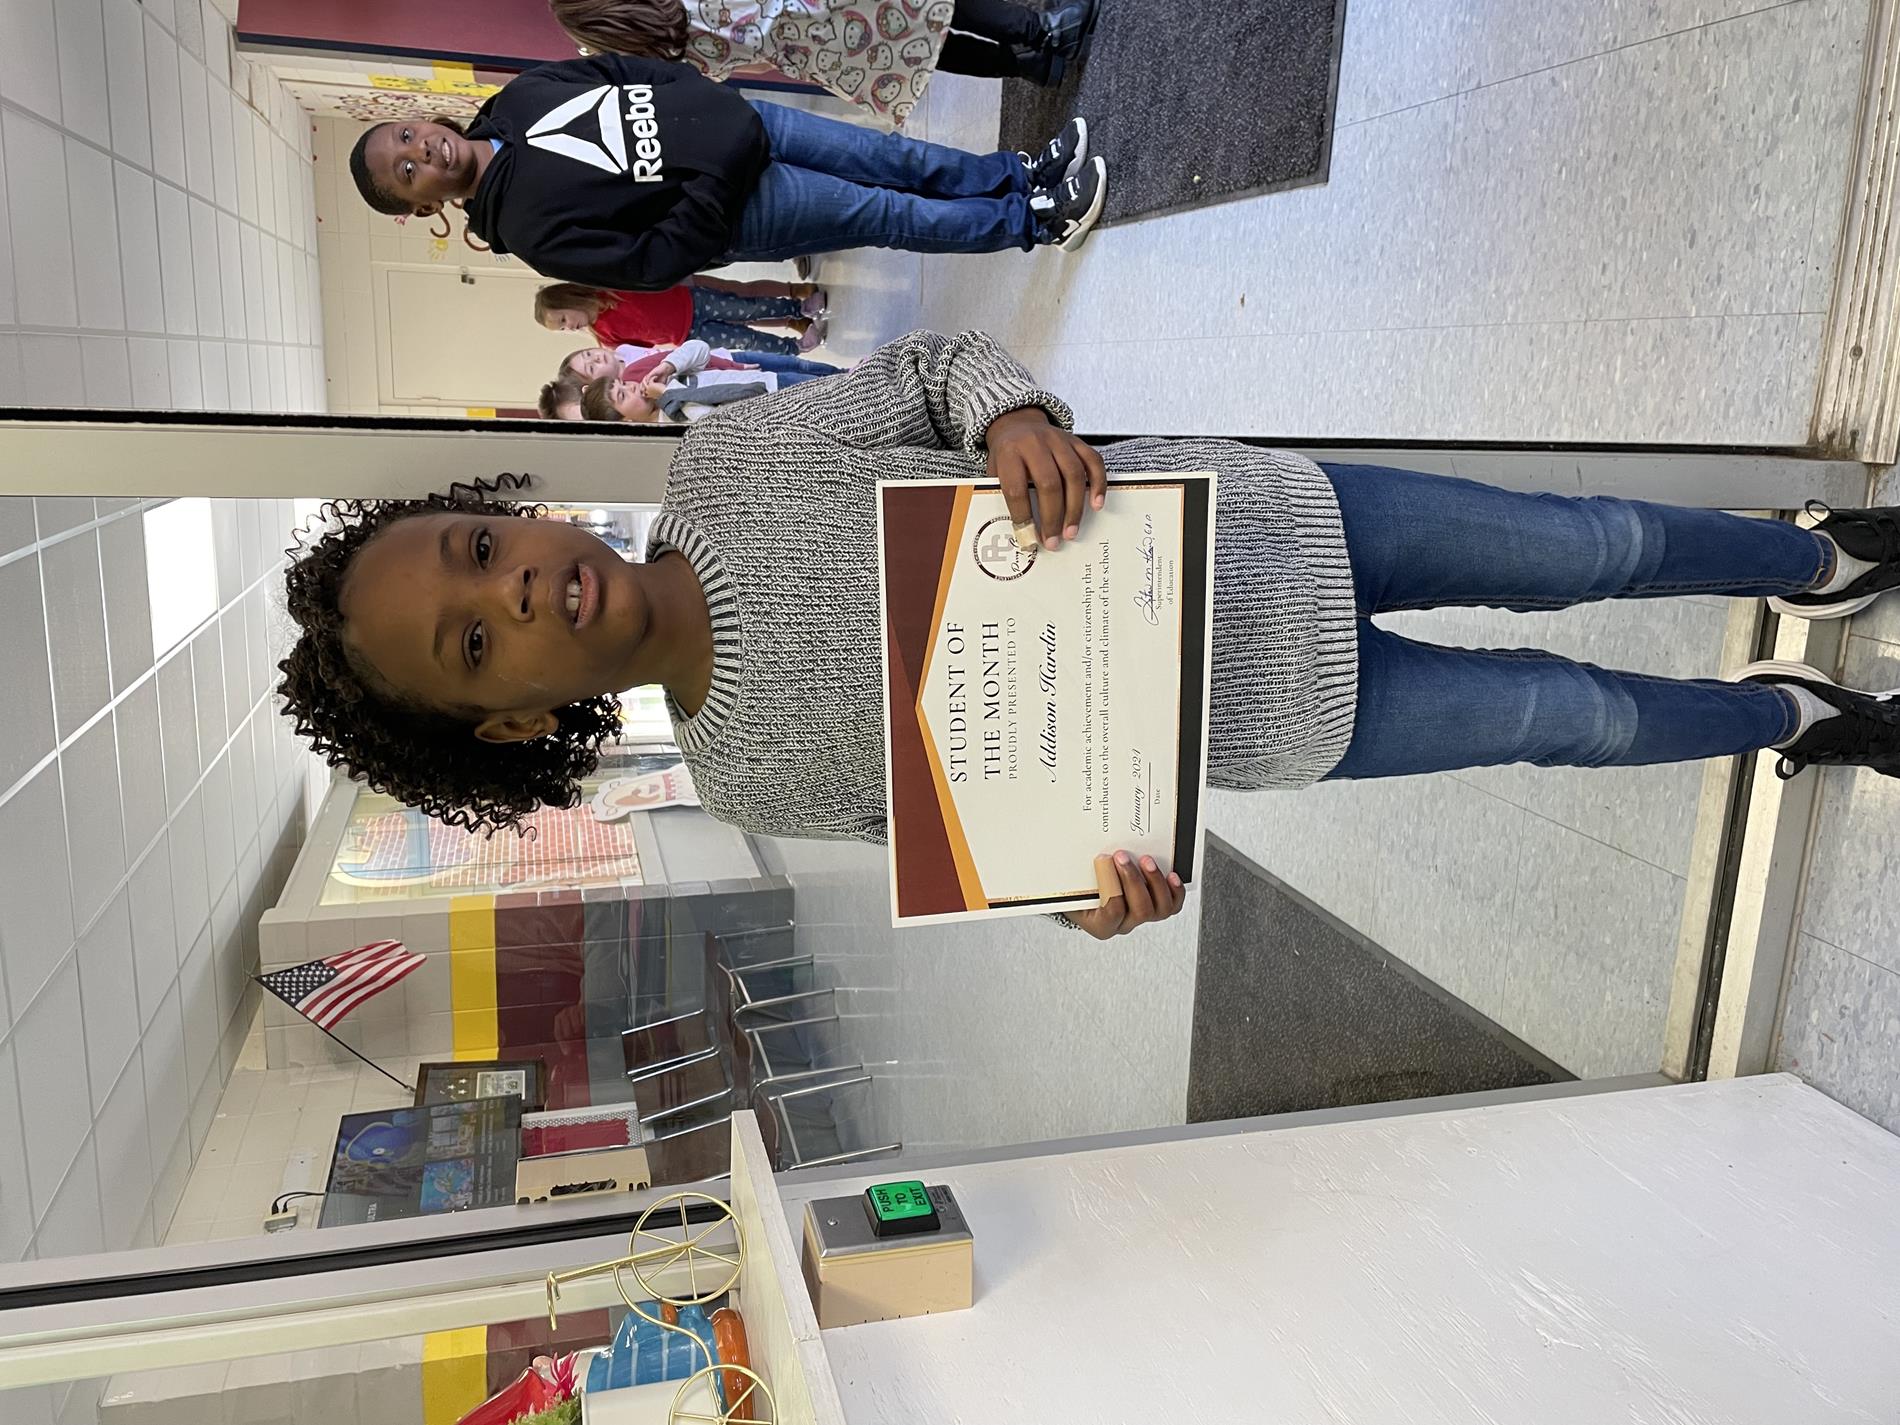 January Student of the Month